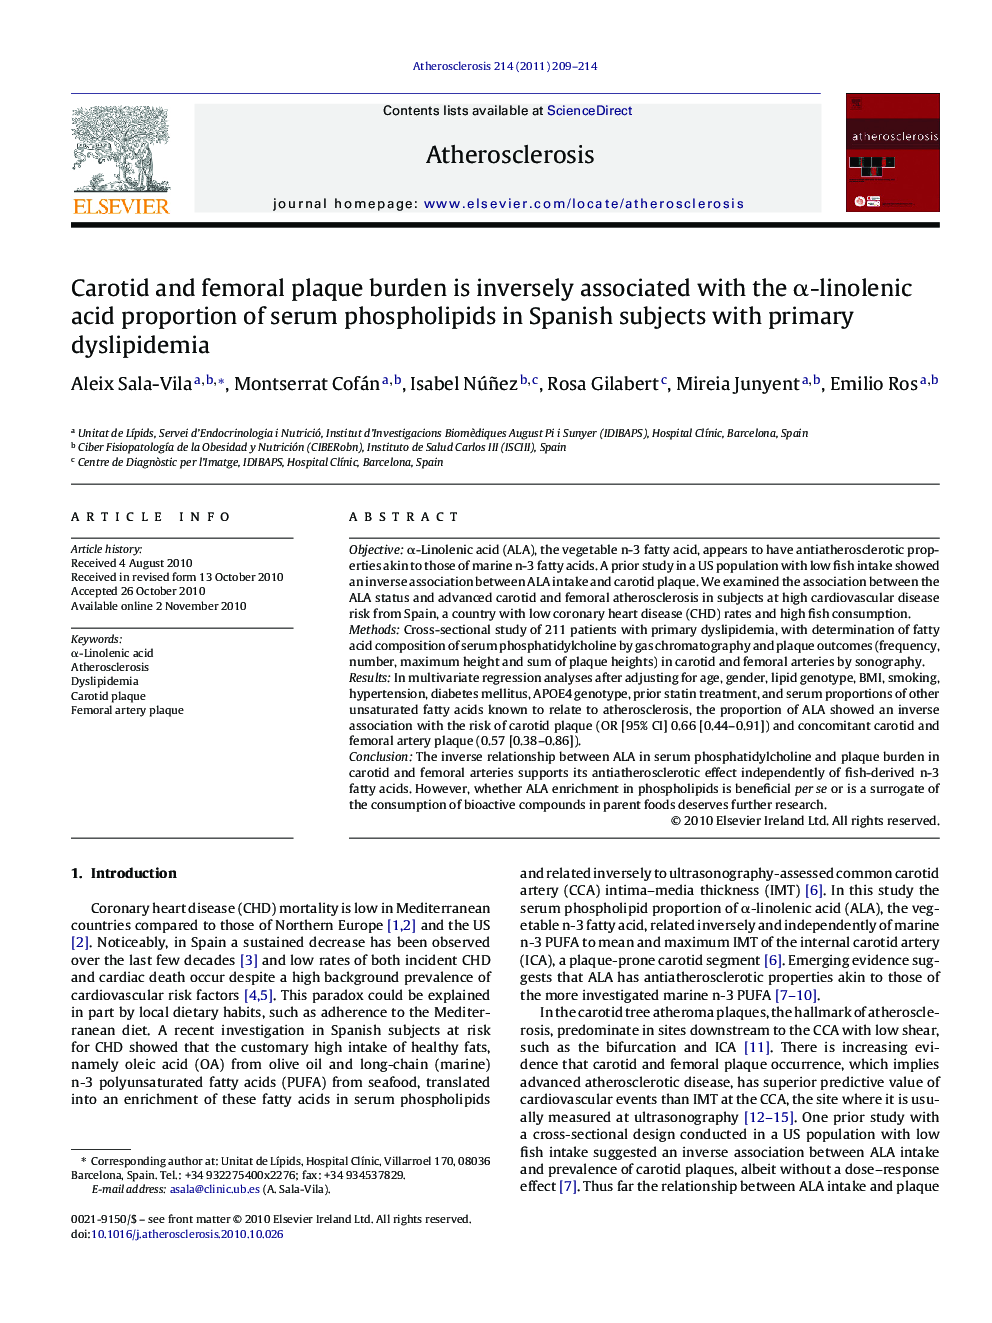 Carotid and femoral plaque burden is inversely associated with the Î±-linolenic acid proportion of serum phospholipids in Spanish subjects with primary dyslipidemia